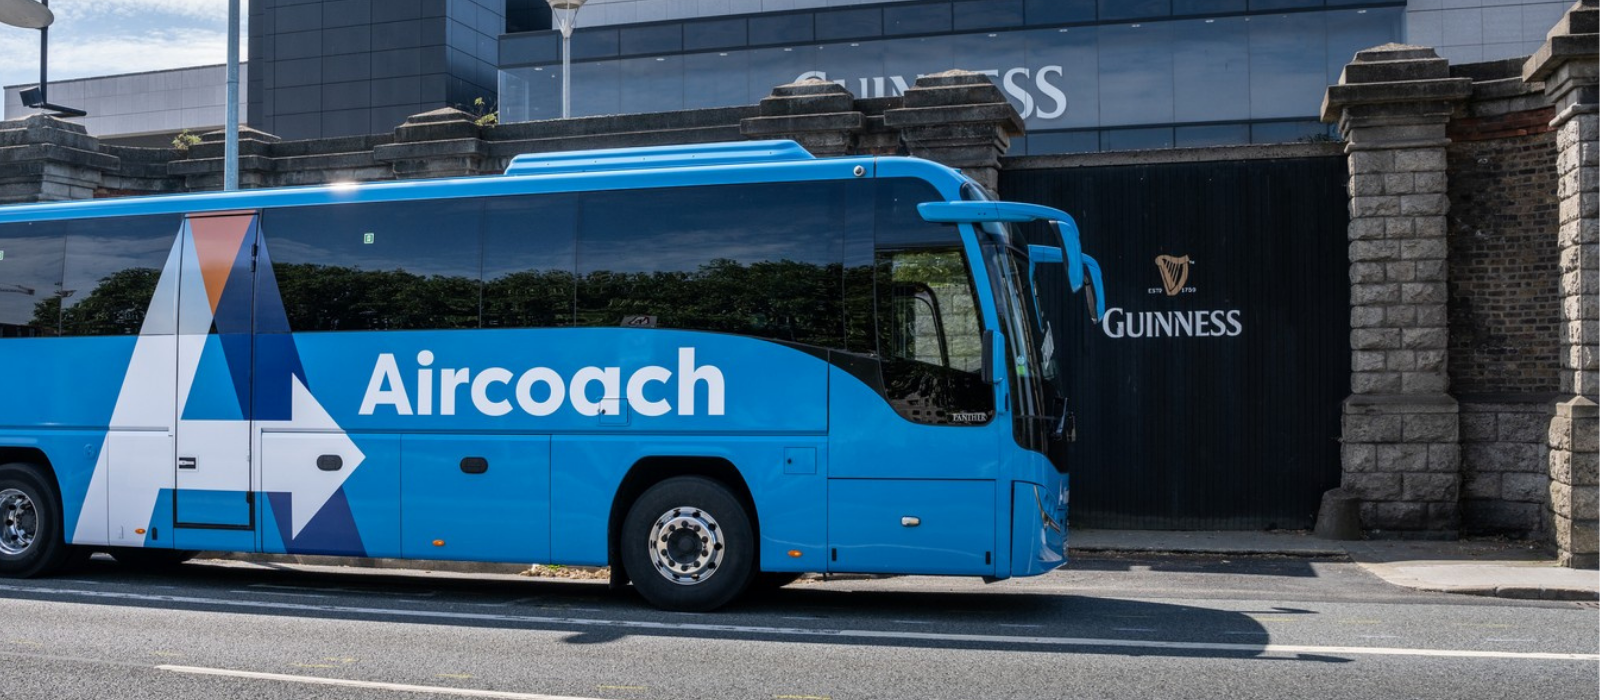 free travel on aircoach